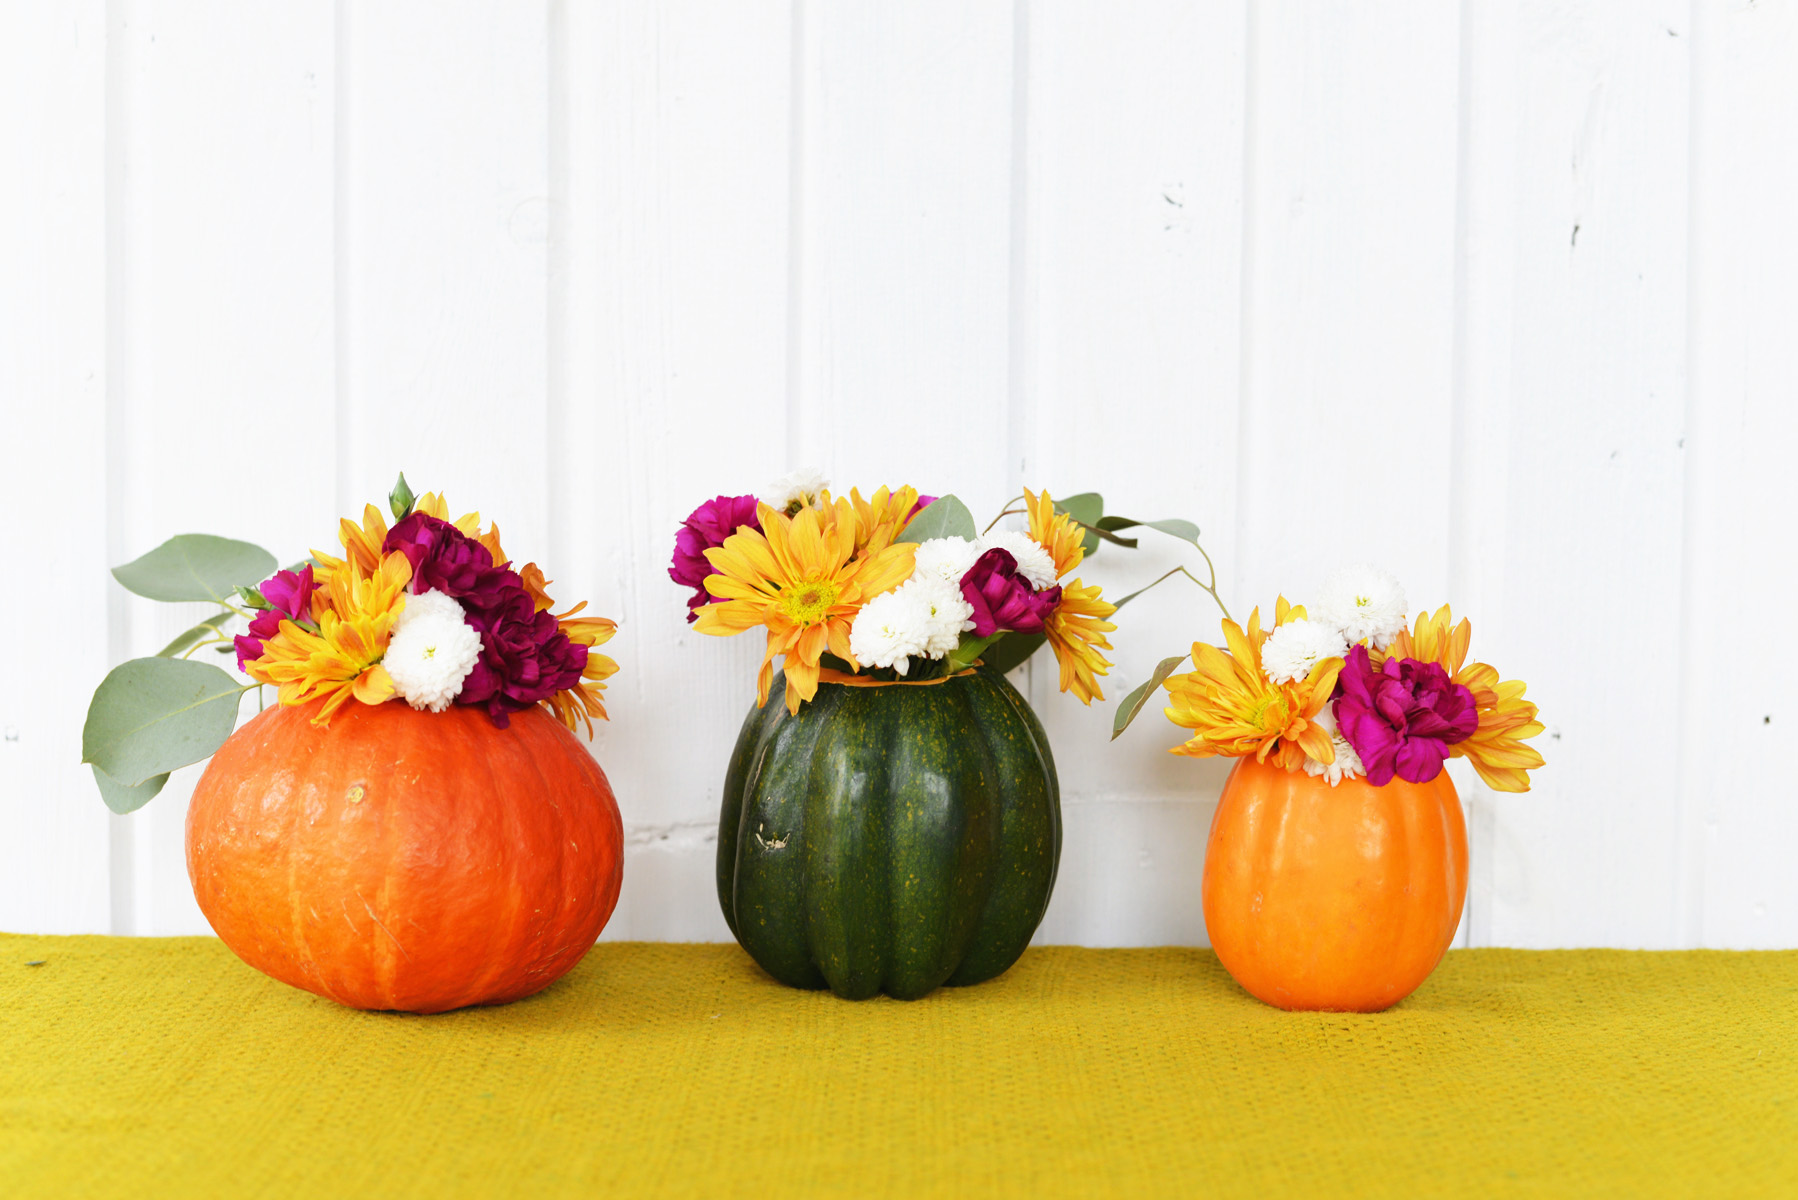 Dress your Thanksgiving table with these charming gourd vases